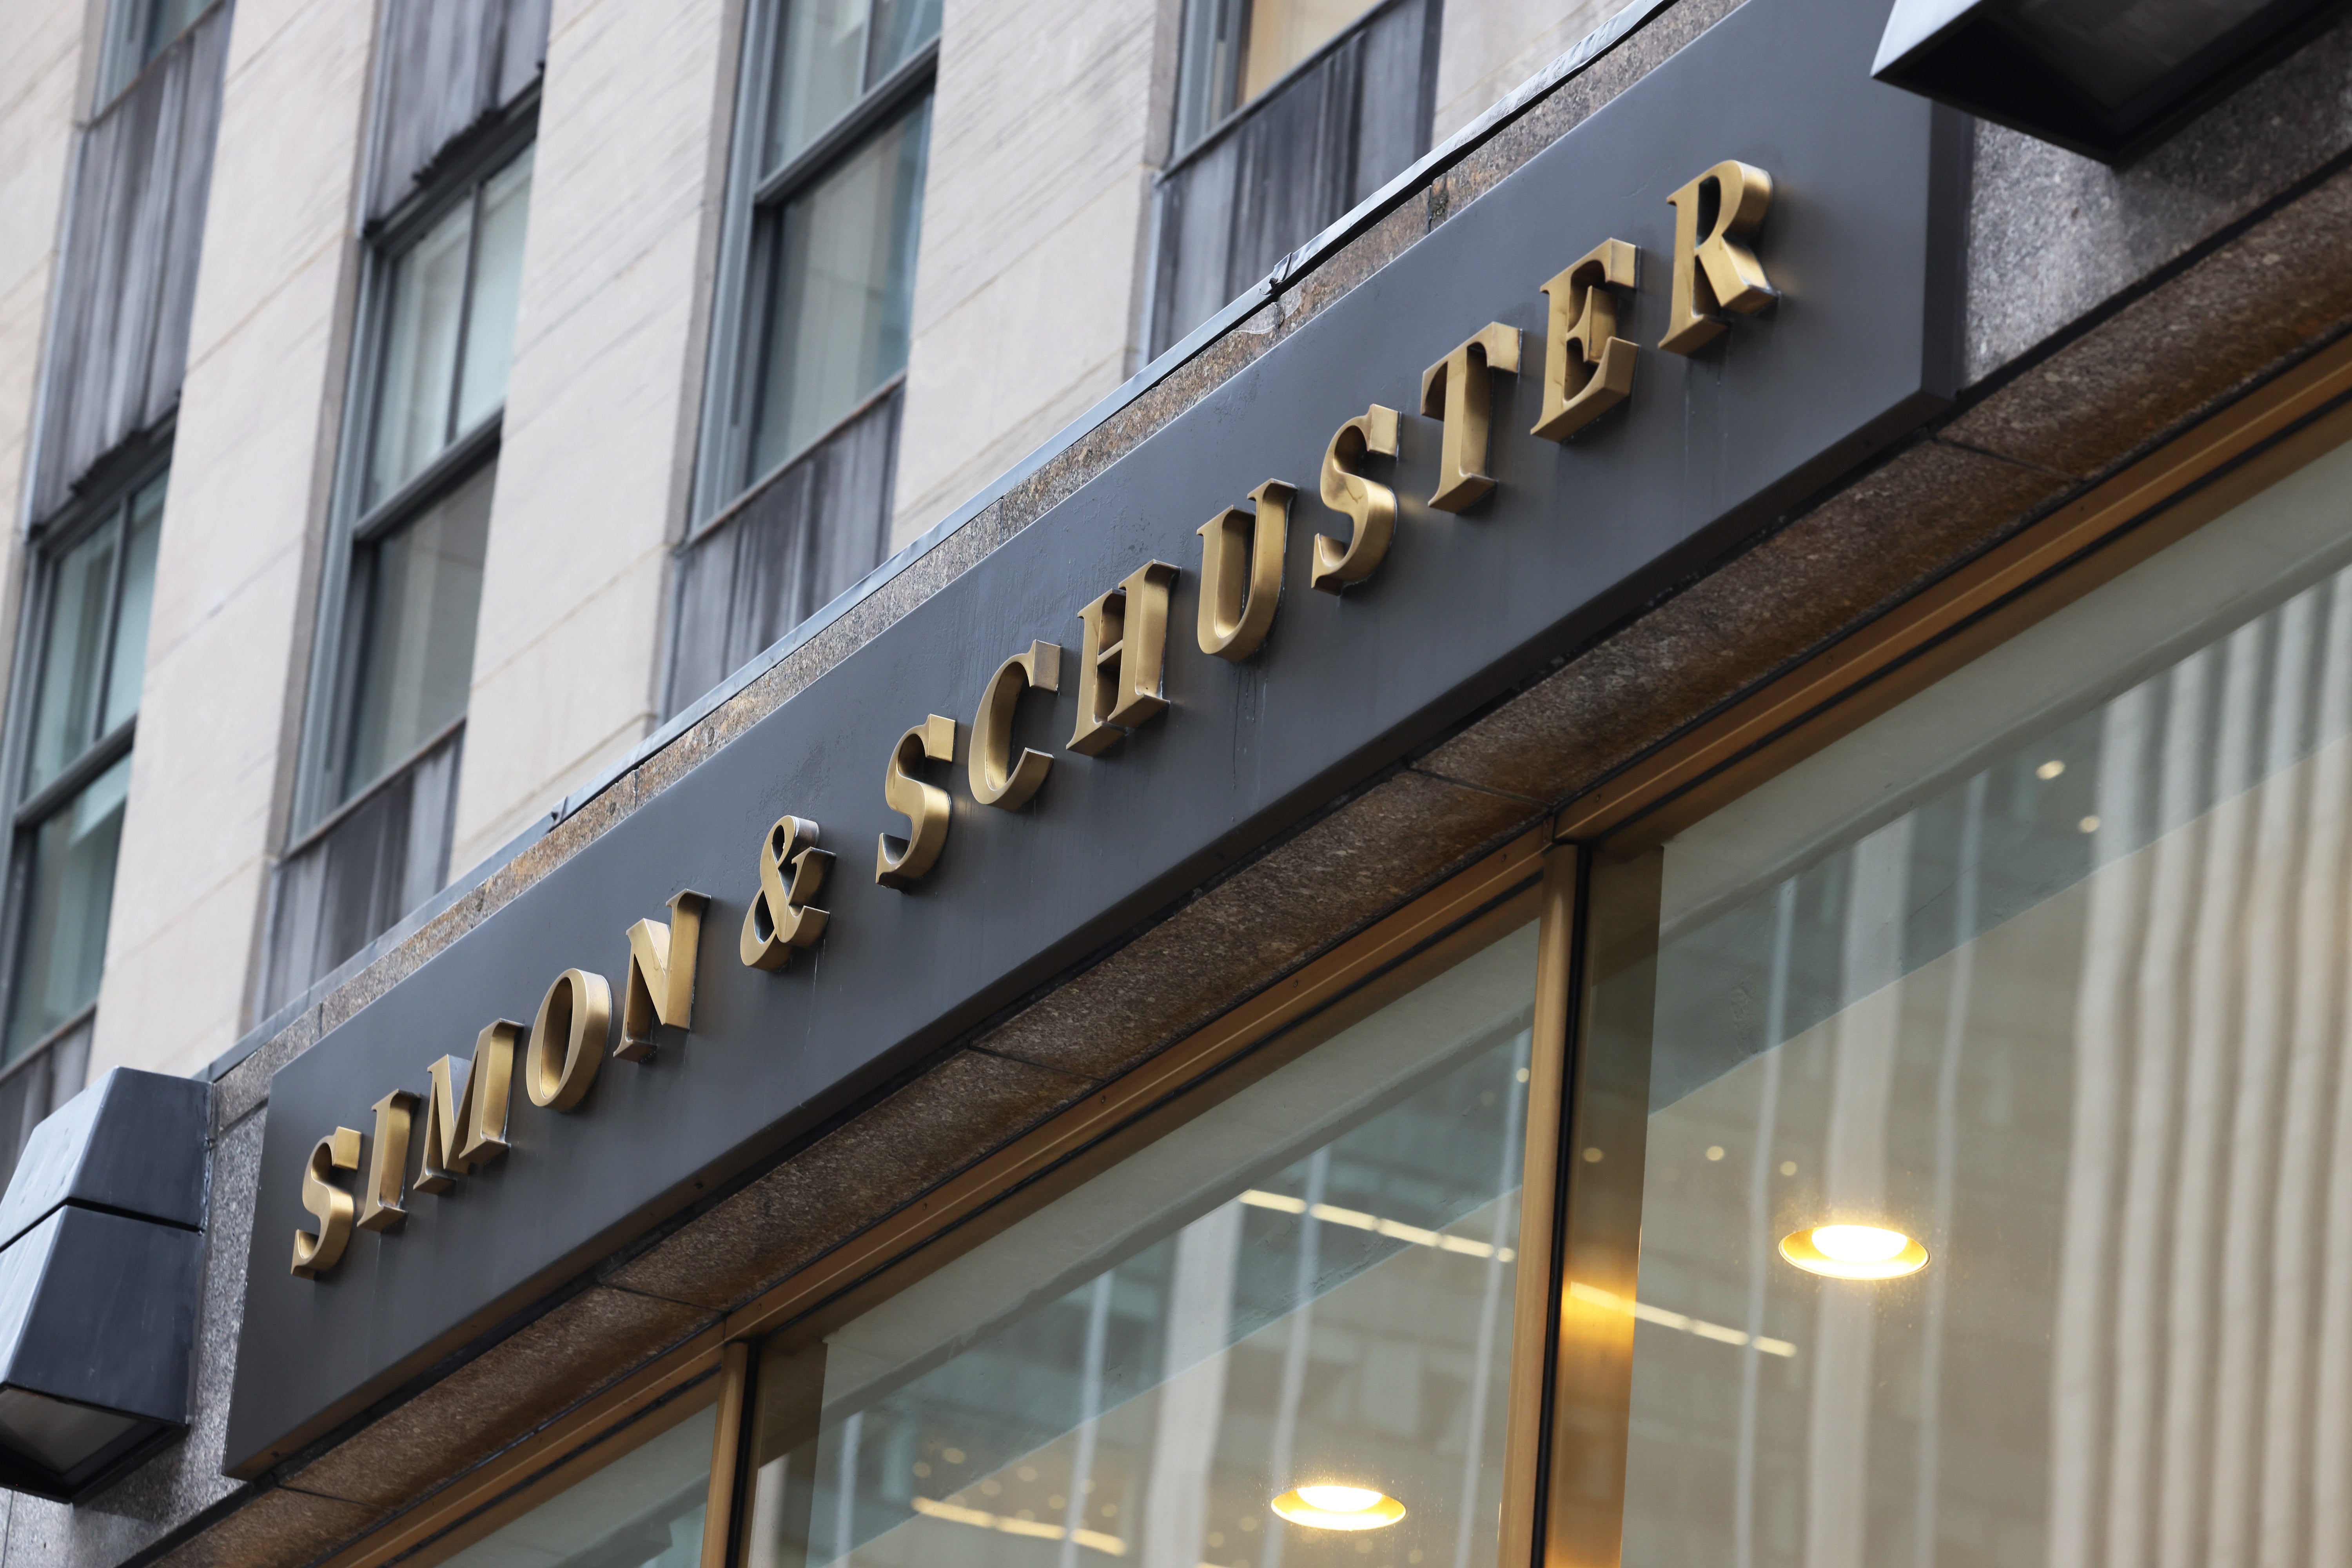 The gold-lettered sign of Simon & Schuster headquarters is seen from an angle.